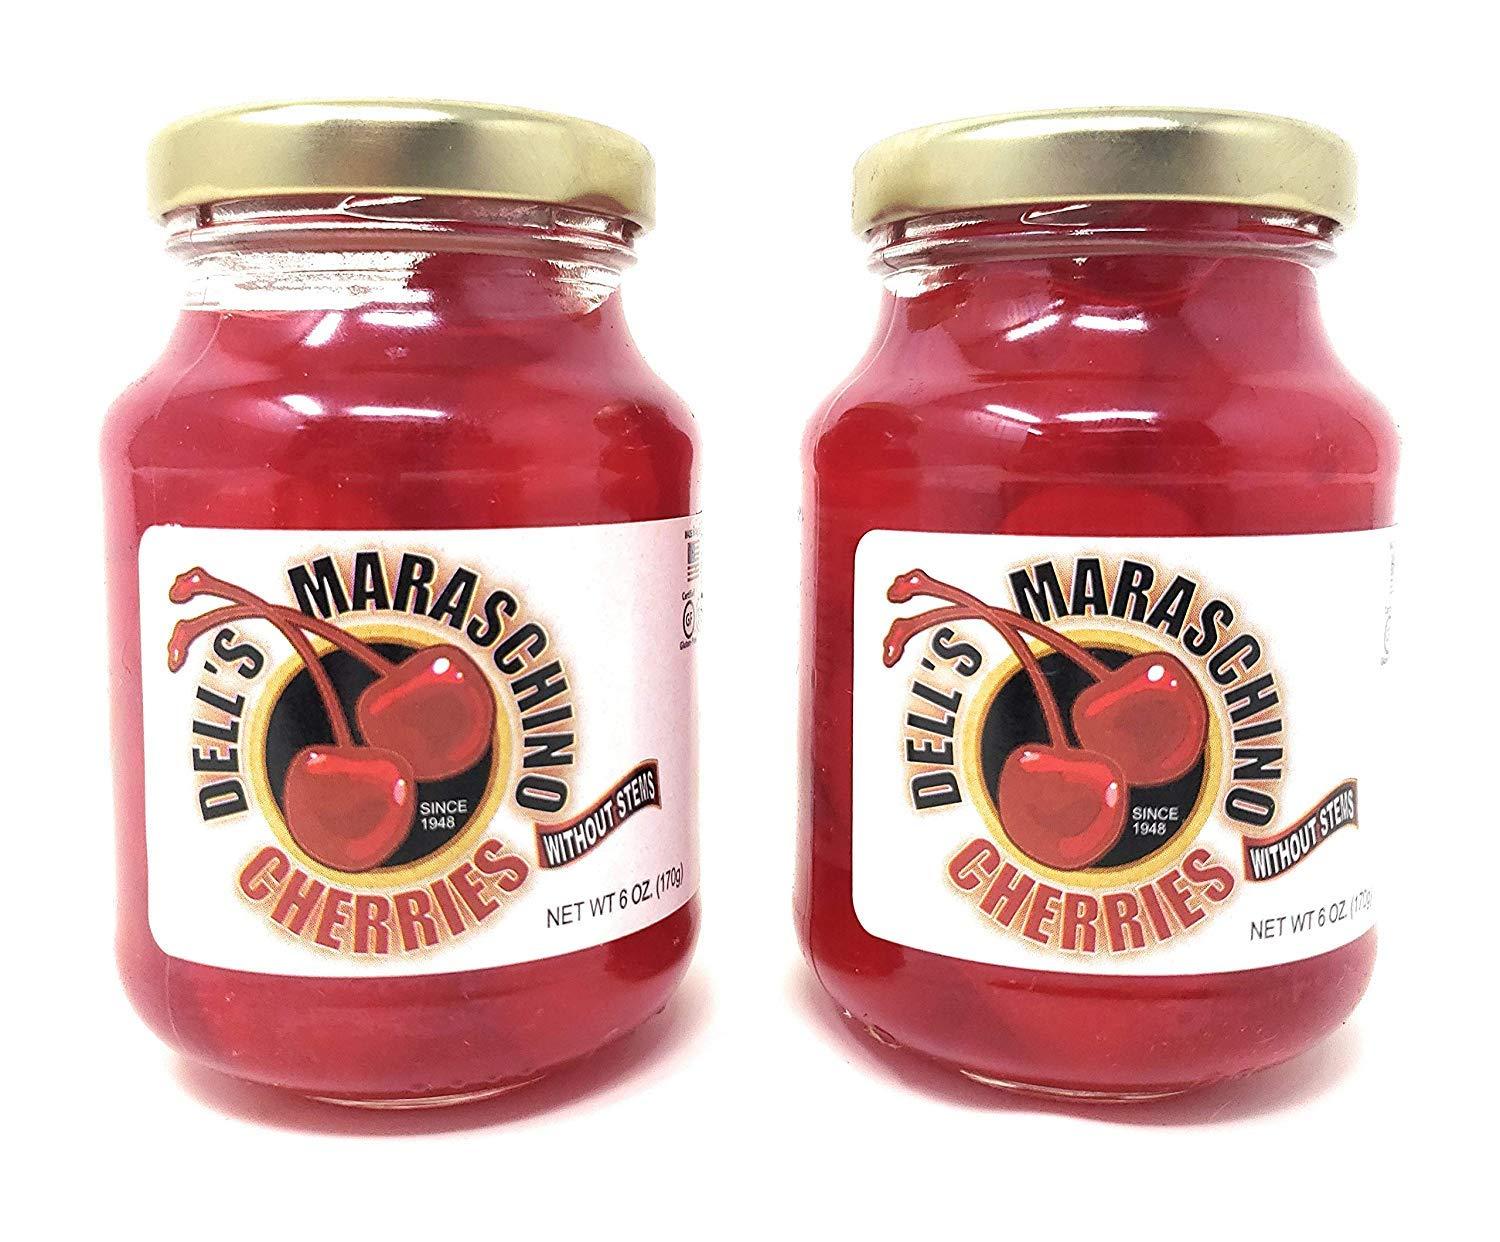 Dells Maraschino Cherries Without Stems 2 Pack Total Of 12oz 8392